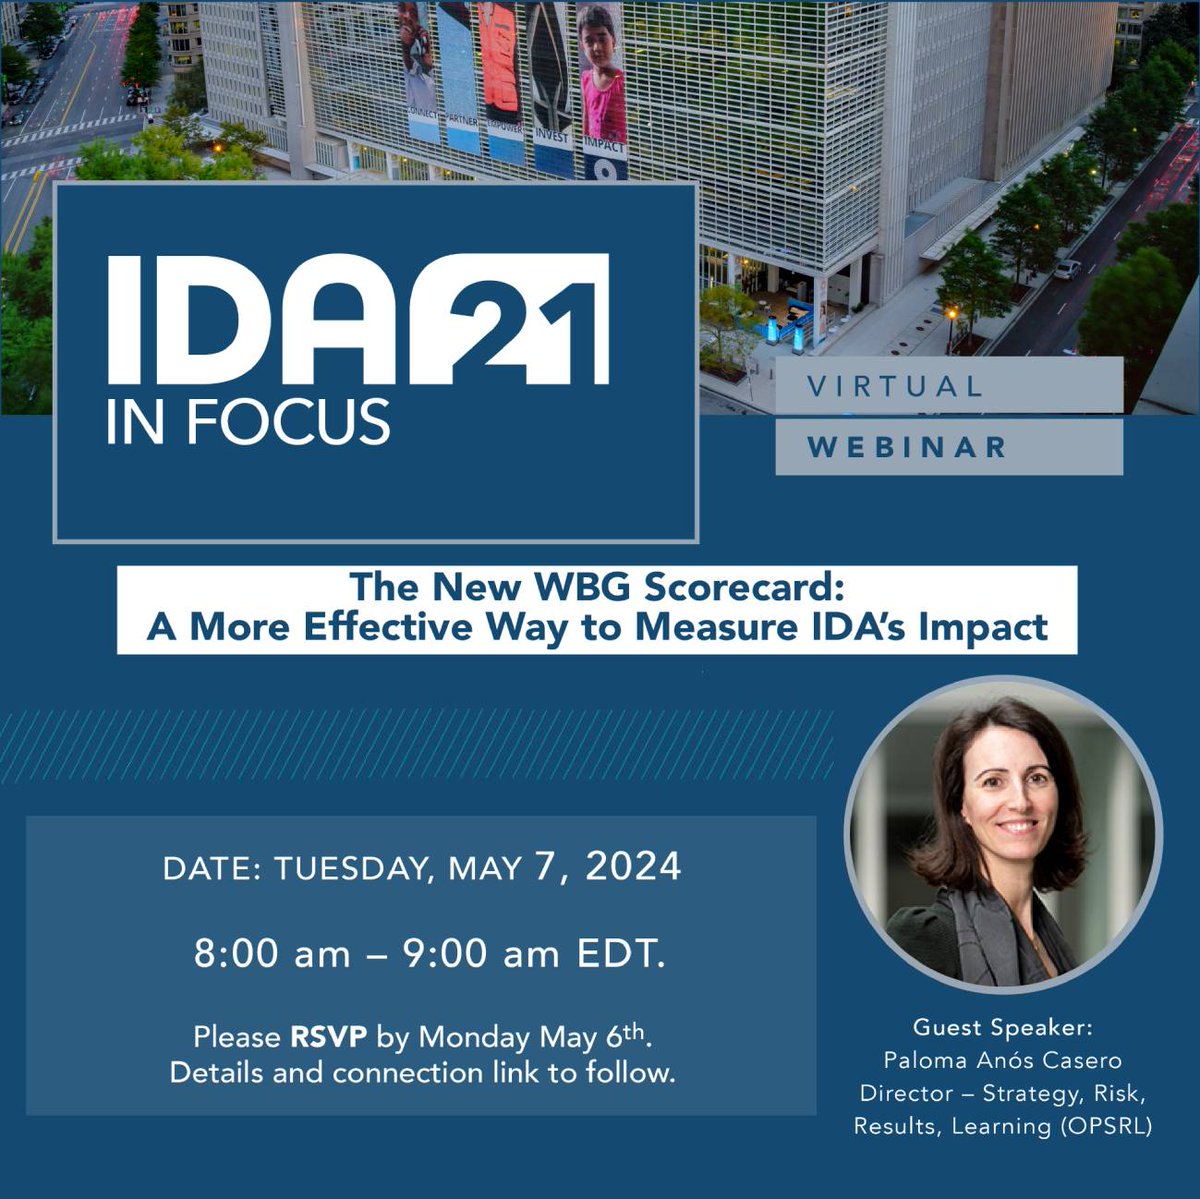 The @WorldBank's new streamlined Corporate Scorecard will improve the way we track progress in IDA countries. Join us for a new #IDAinFocus🔭 Webinar featuring guest speaker, Paloma Anos Casero. 📅 Tues, May 7 ⏰8:00 am EDT ℹ️ wrld.bg/lhEg50Rngcy #IDAworks #IDA21